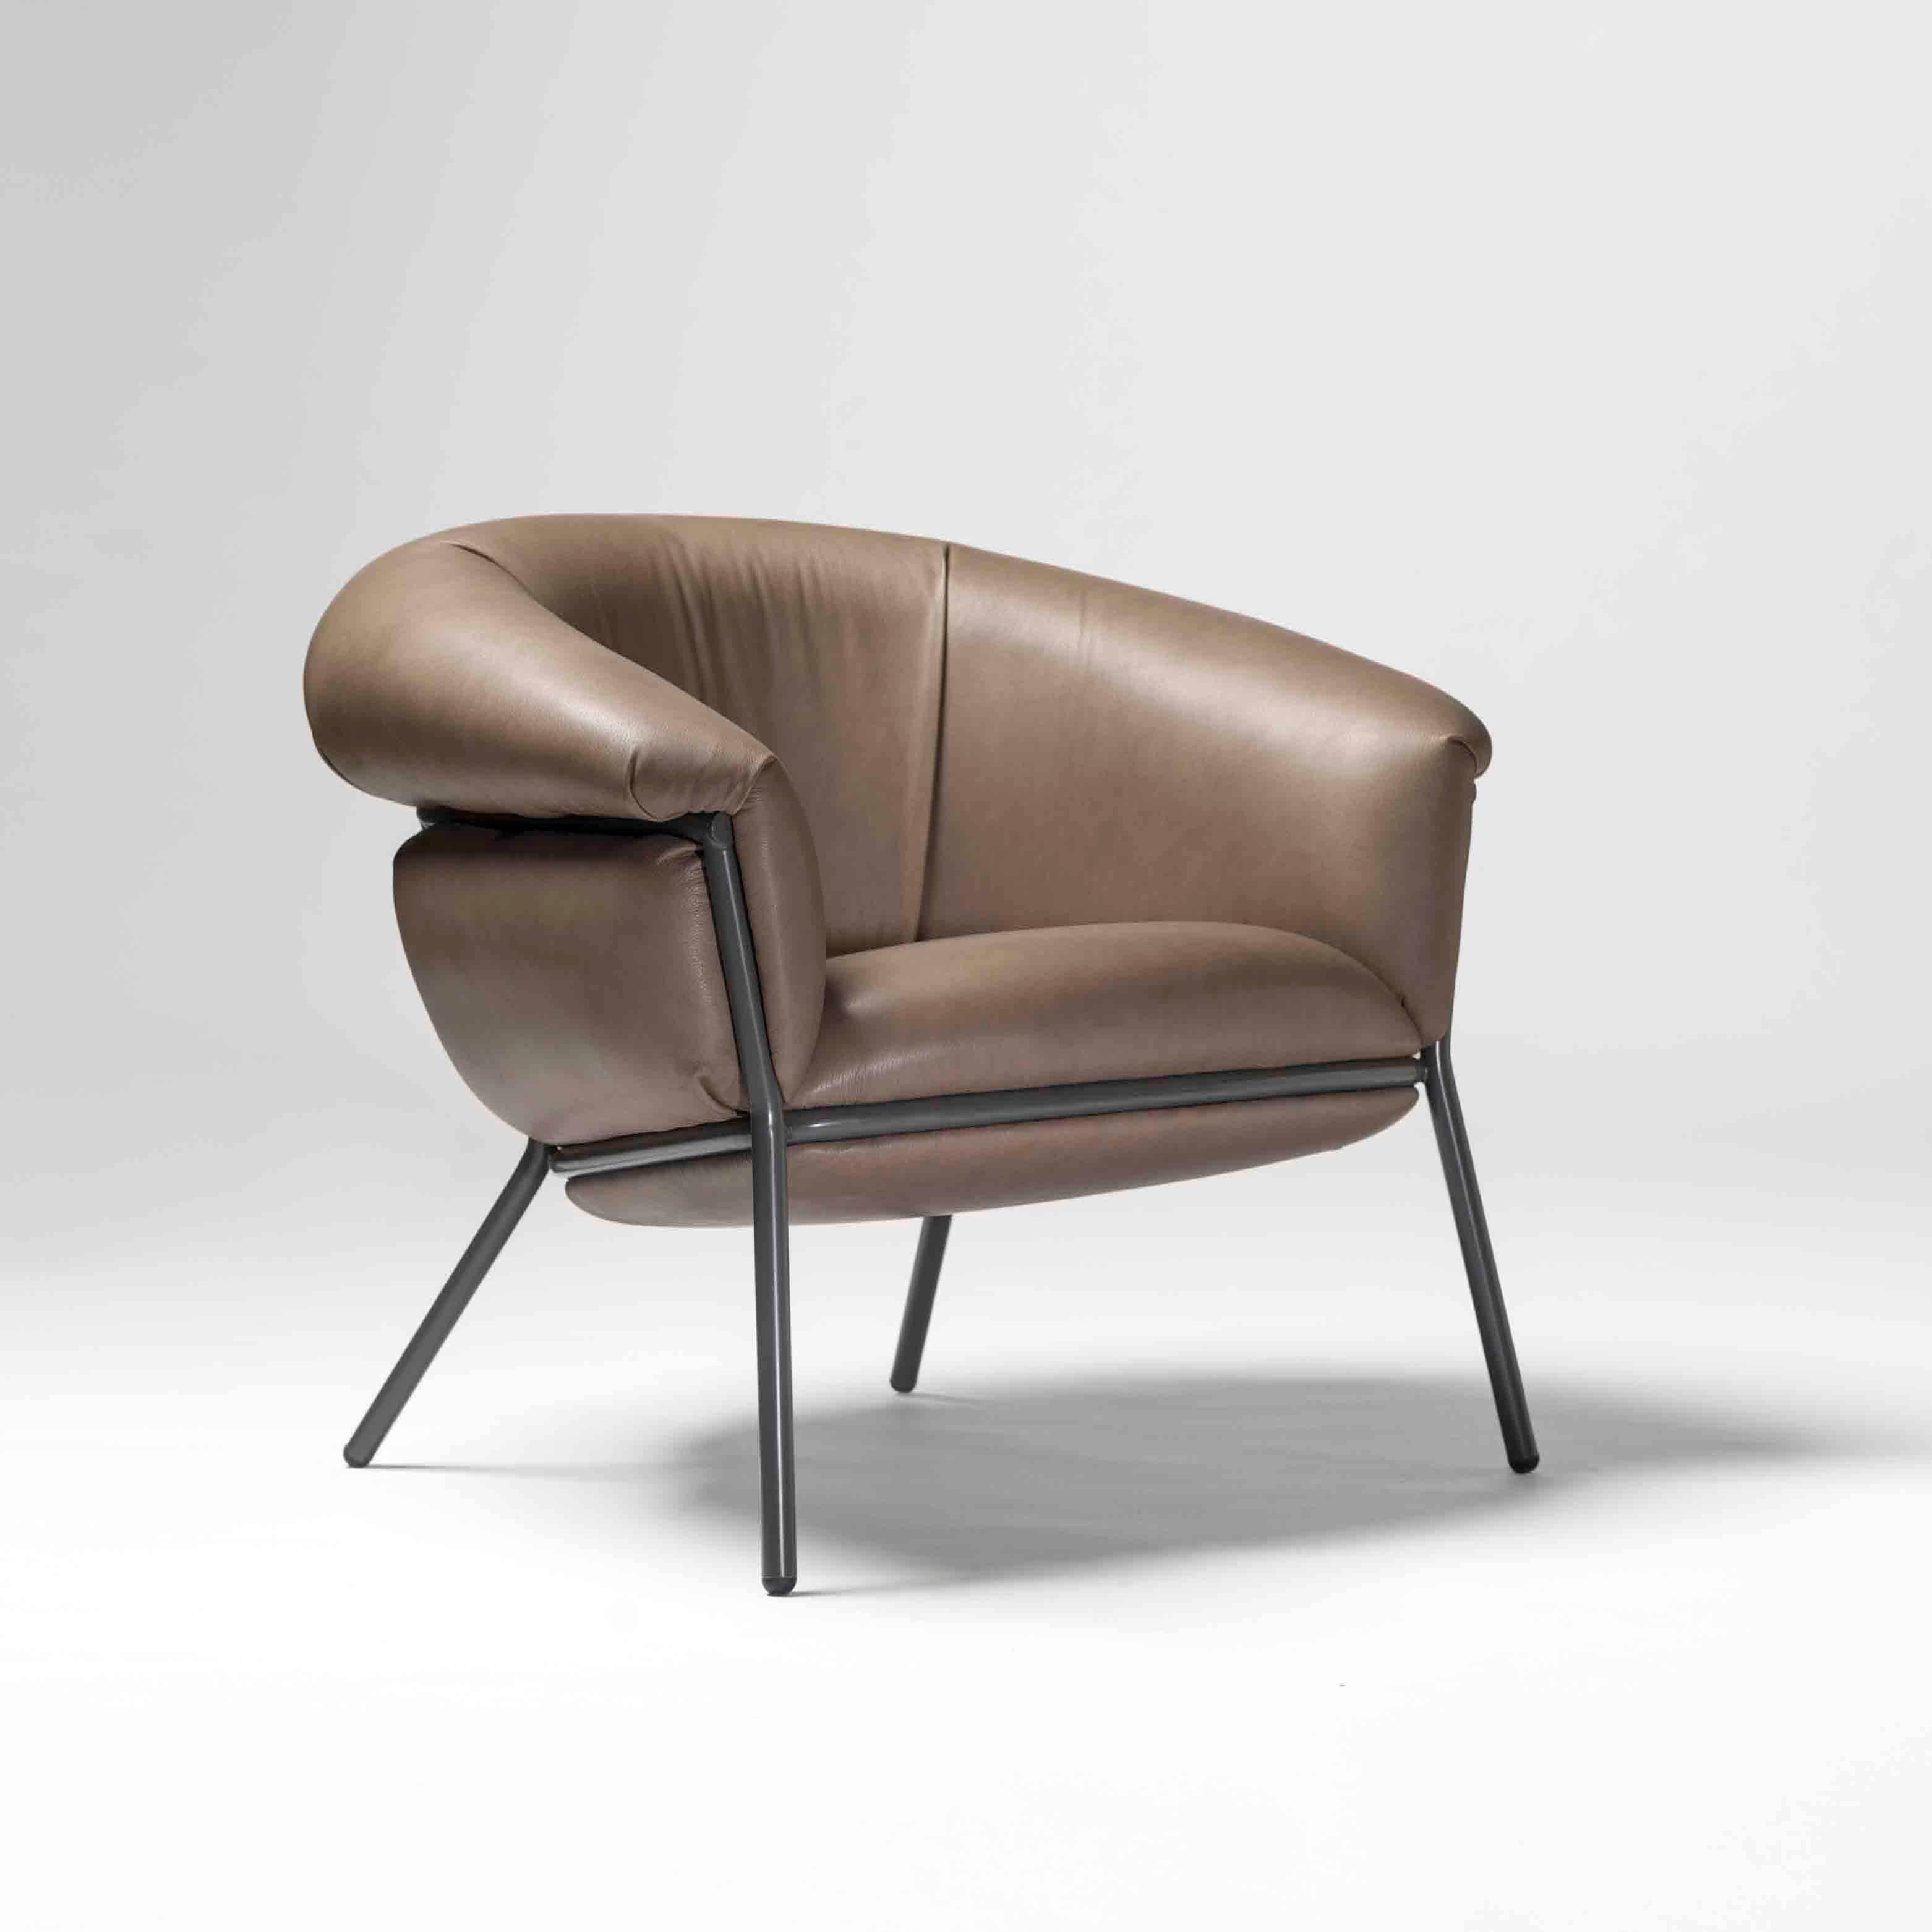 An iron tubular (25mm) structured armchair. Seat and backrest upholstered in leather.

The leather upholstery oozes over the bare iron structure to contrast with the most luxurious touch of the skin.